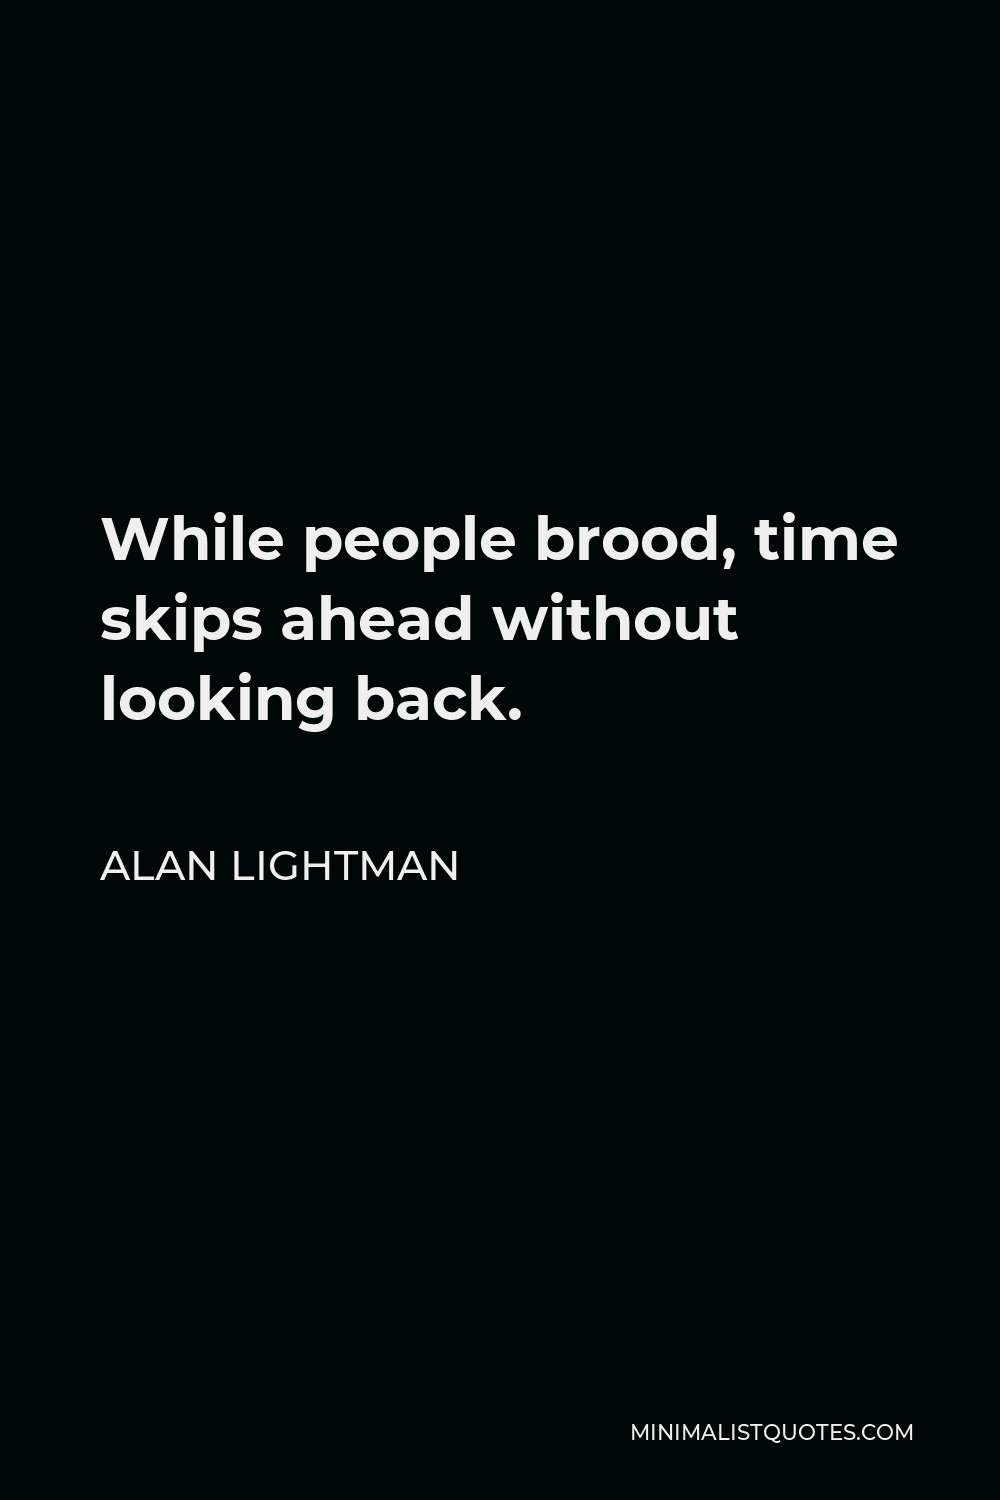 Alan Lightman Quote - While people brood, time skips ahead without looking back.